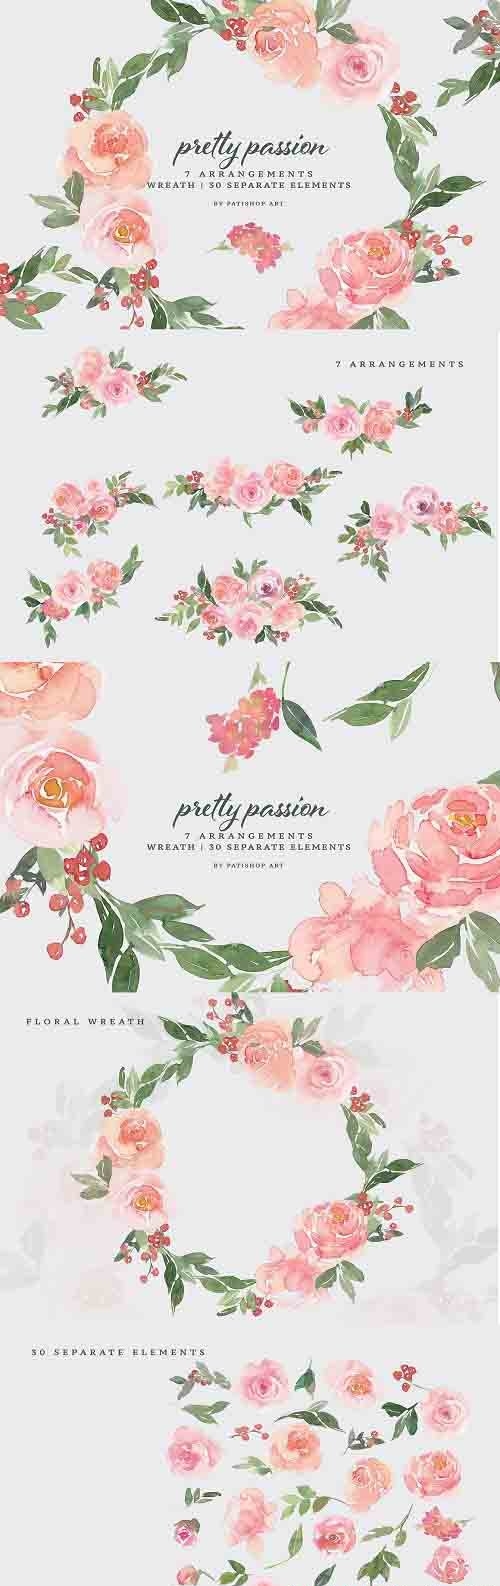 Download Blush Pink Flower Red Berry Clipart - 5993123 - DesireFX.COM